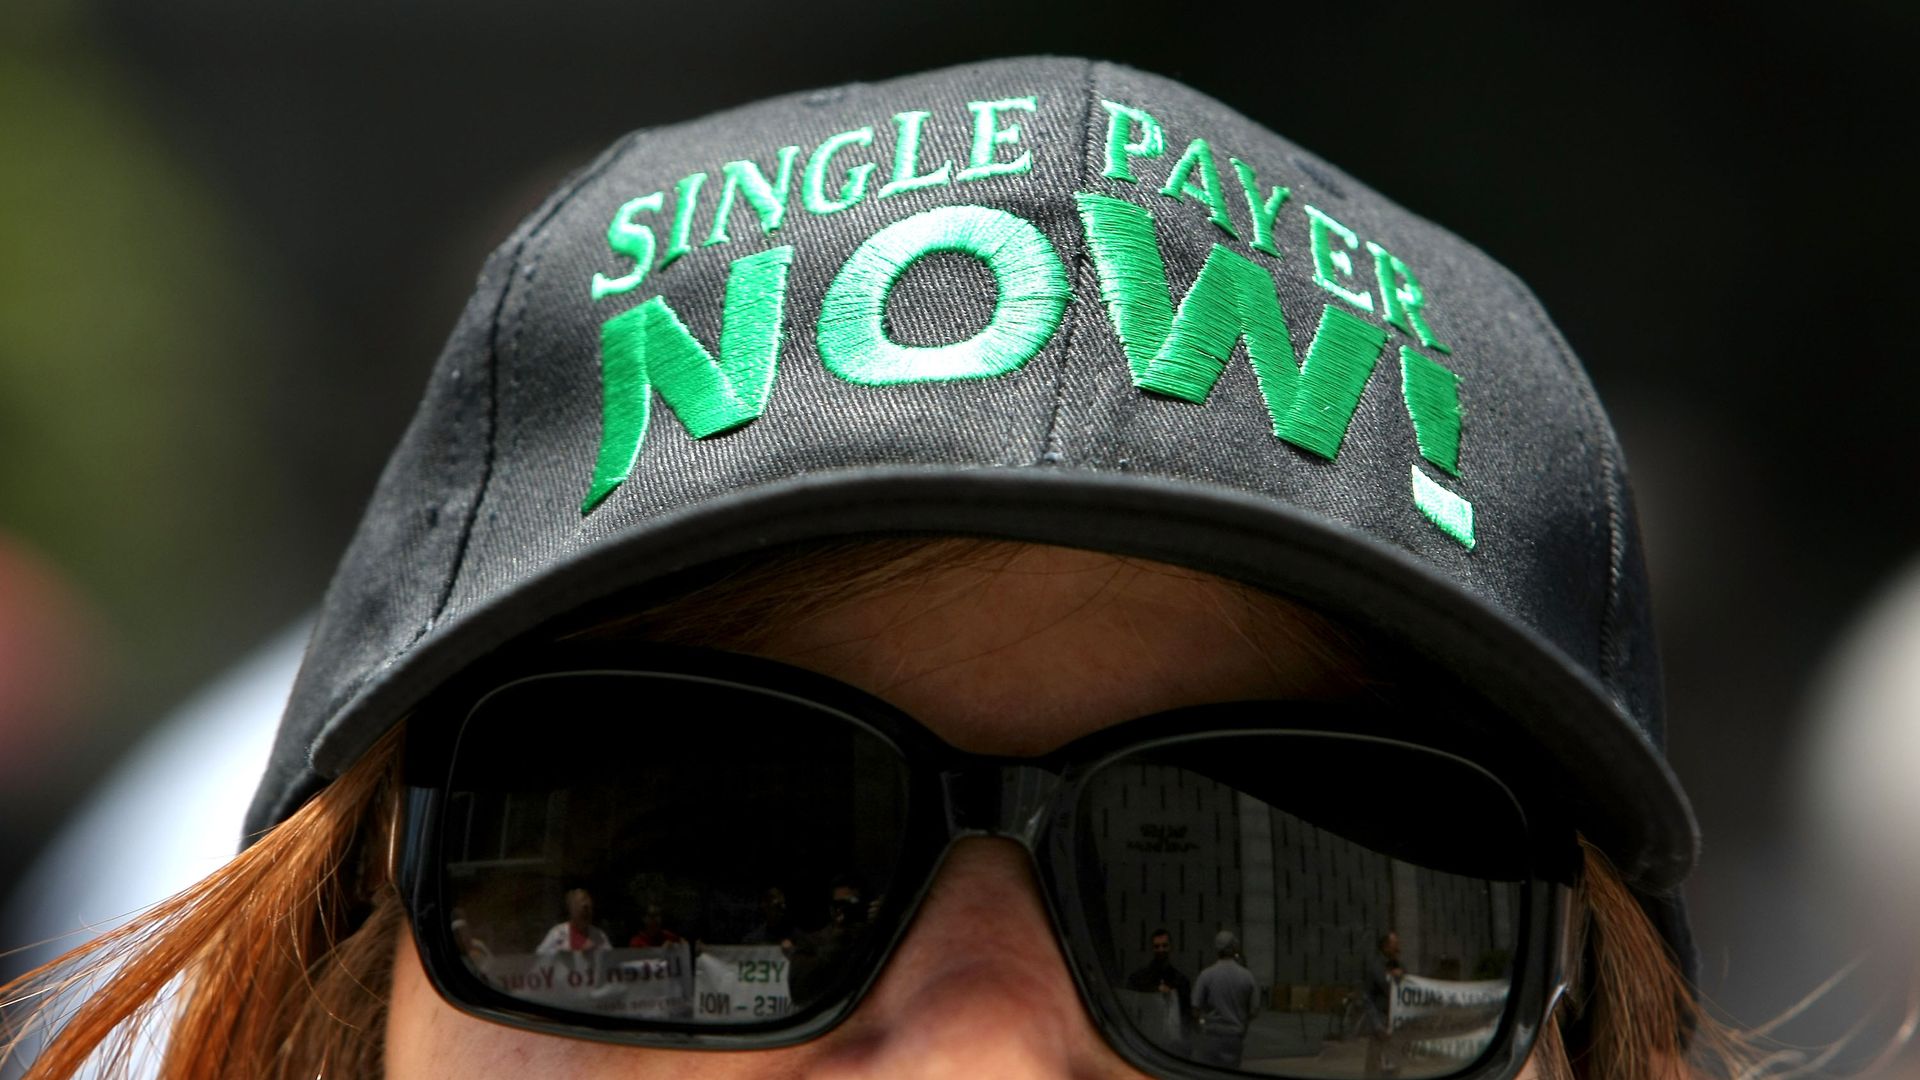 Woman wearing a hat that says, "Single payer now!"